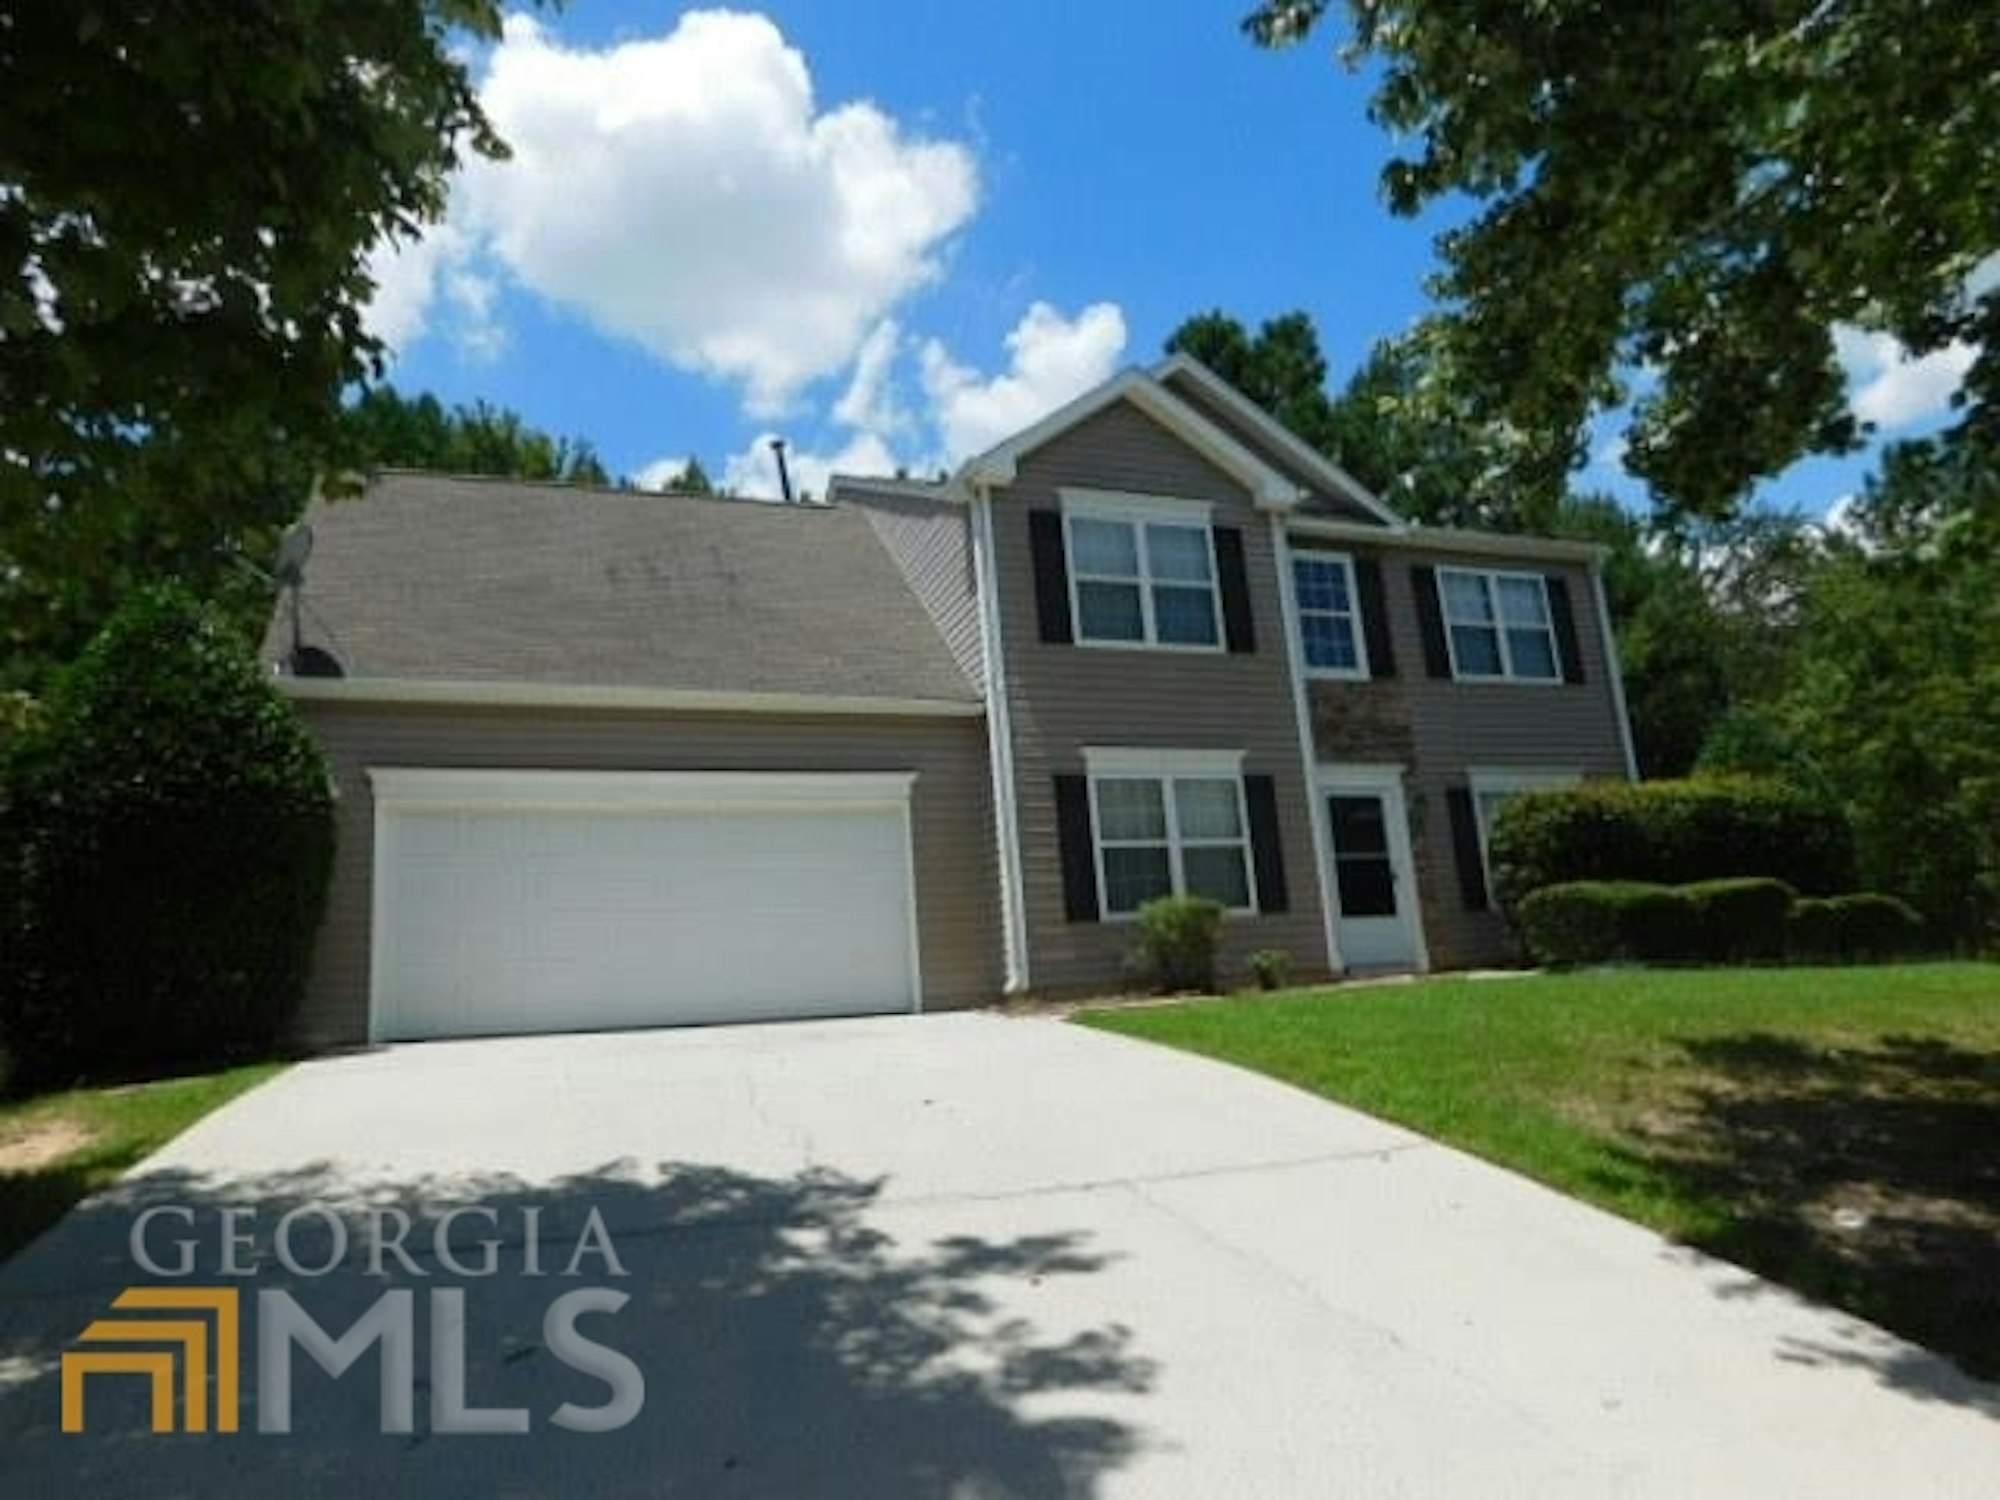 Photo 1 of 22 - 1742 Campbell Ives Ct, Lawrenceville, GA 30045